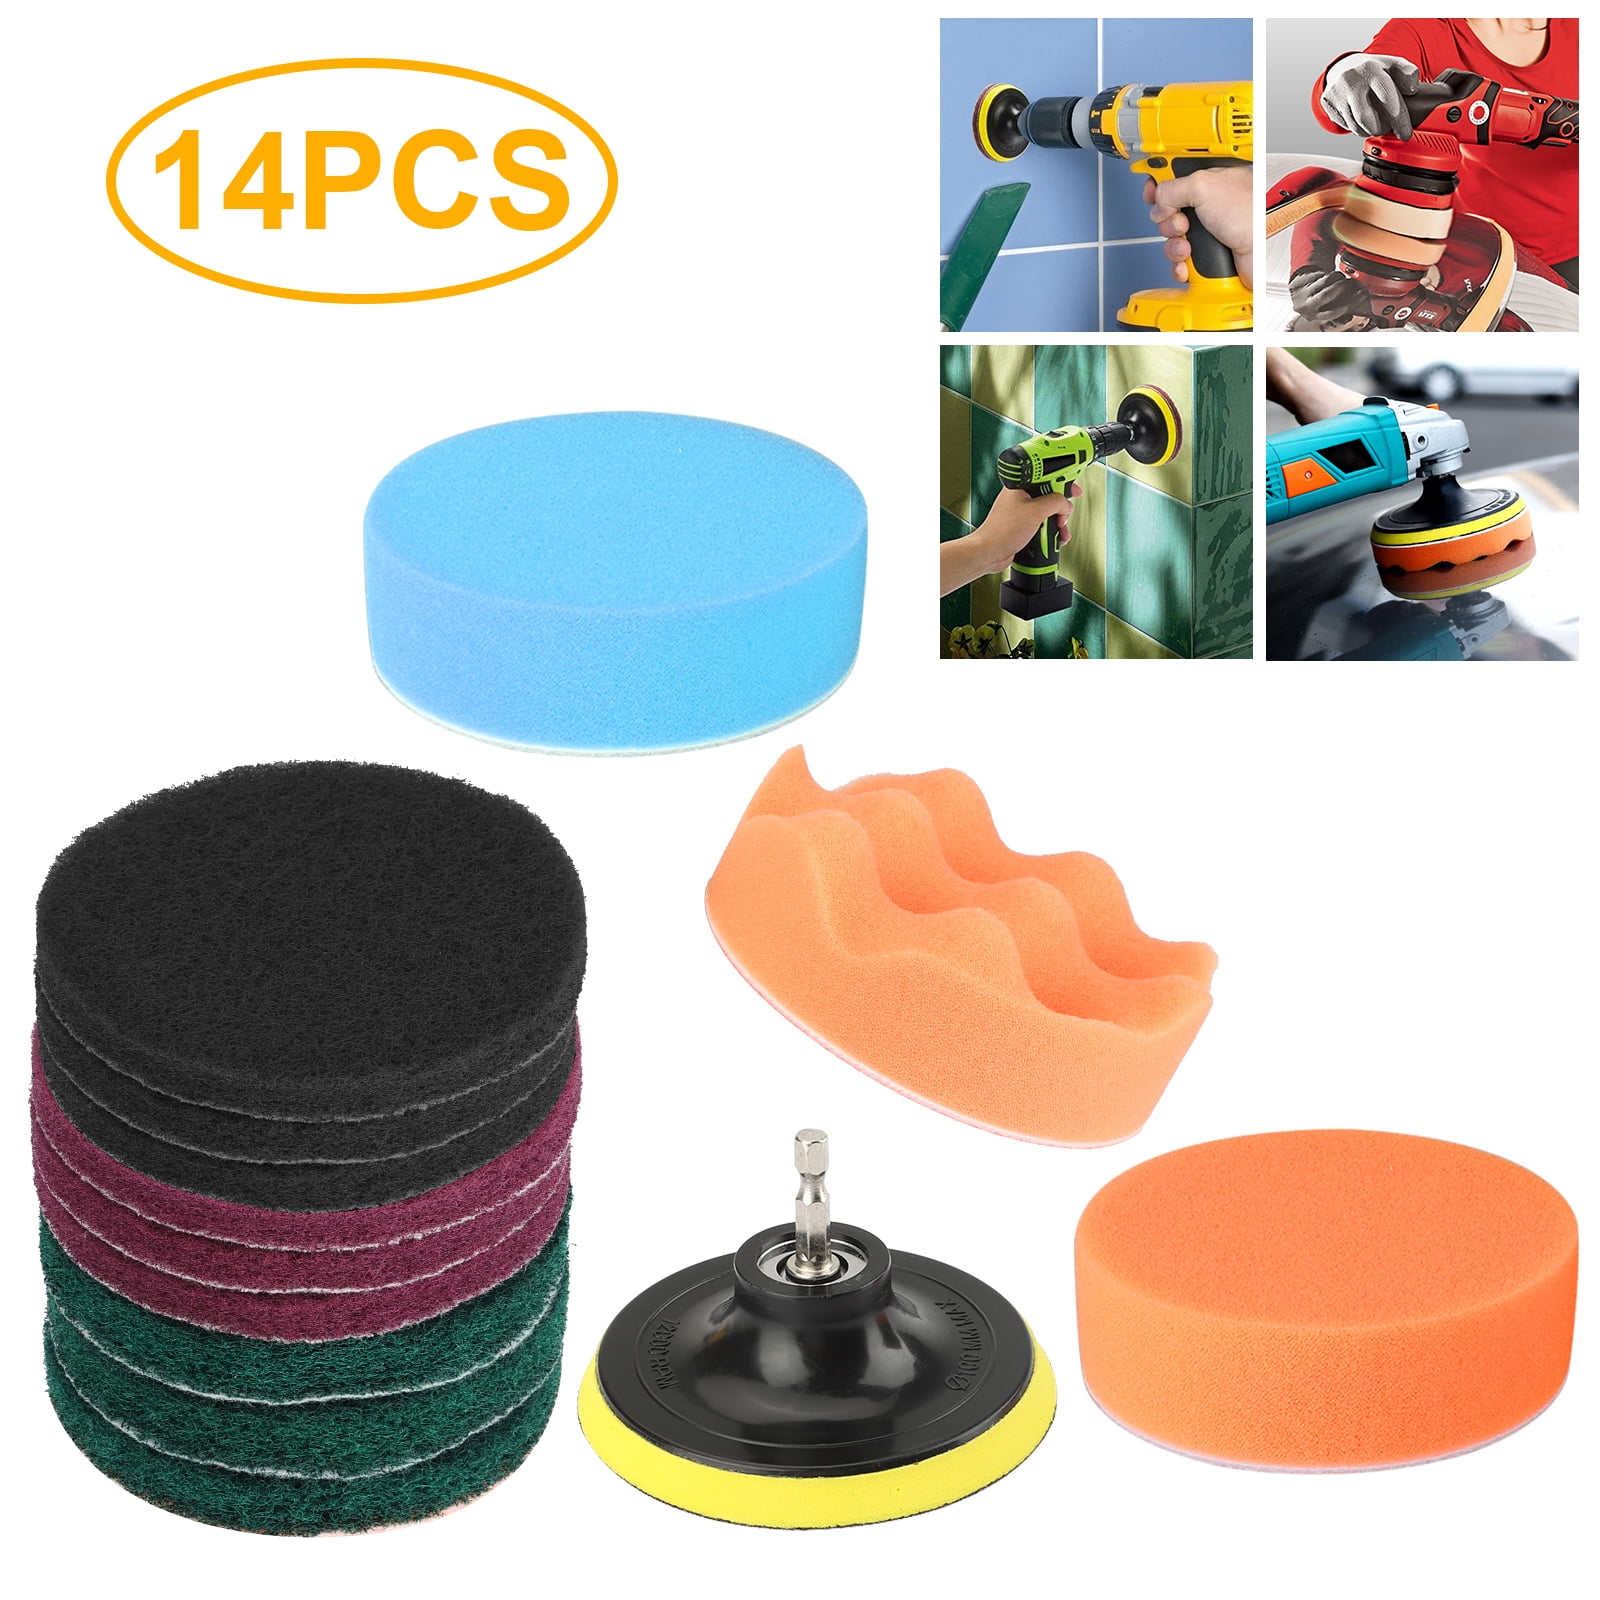 SPTA 10pcs Polishing Pads Kit, 7 Inches Large Size Buffing Pads, Car Foam Buffing Sponge Pads Kit with 5/8-11 Backing Plate for Car Care Polisher